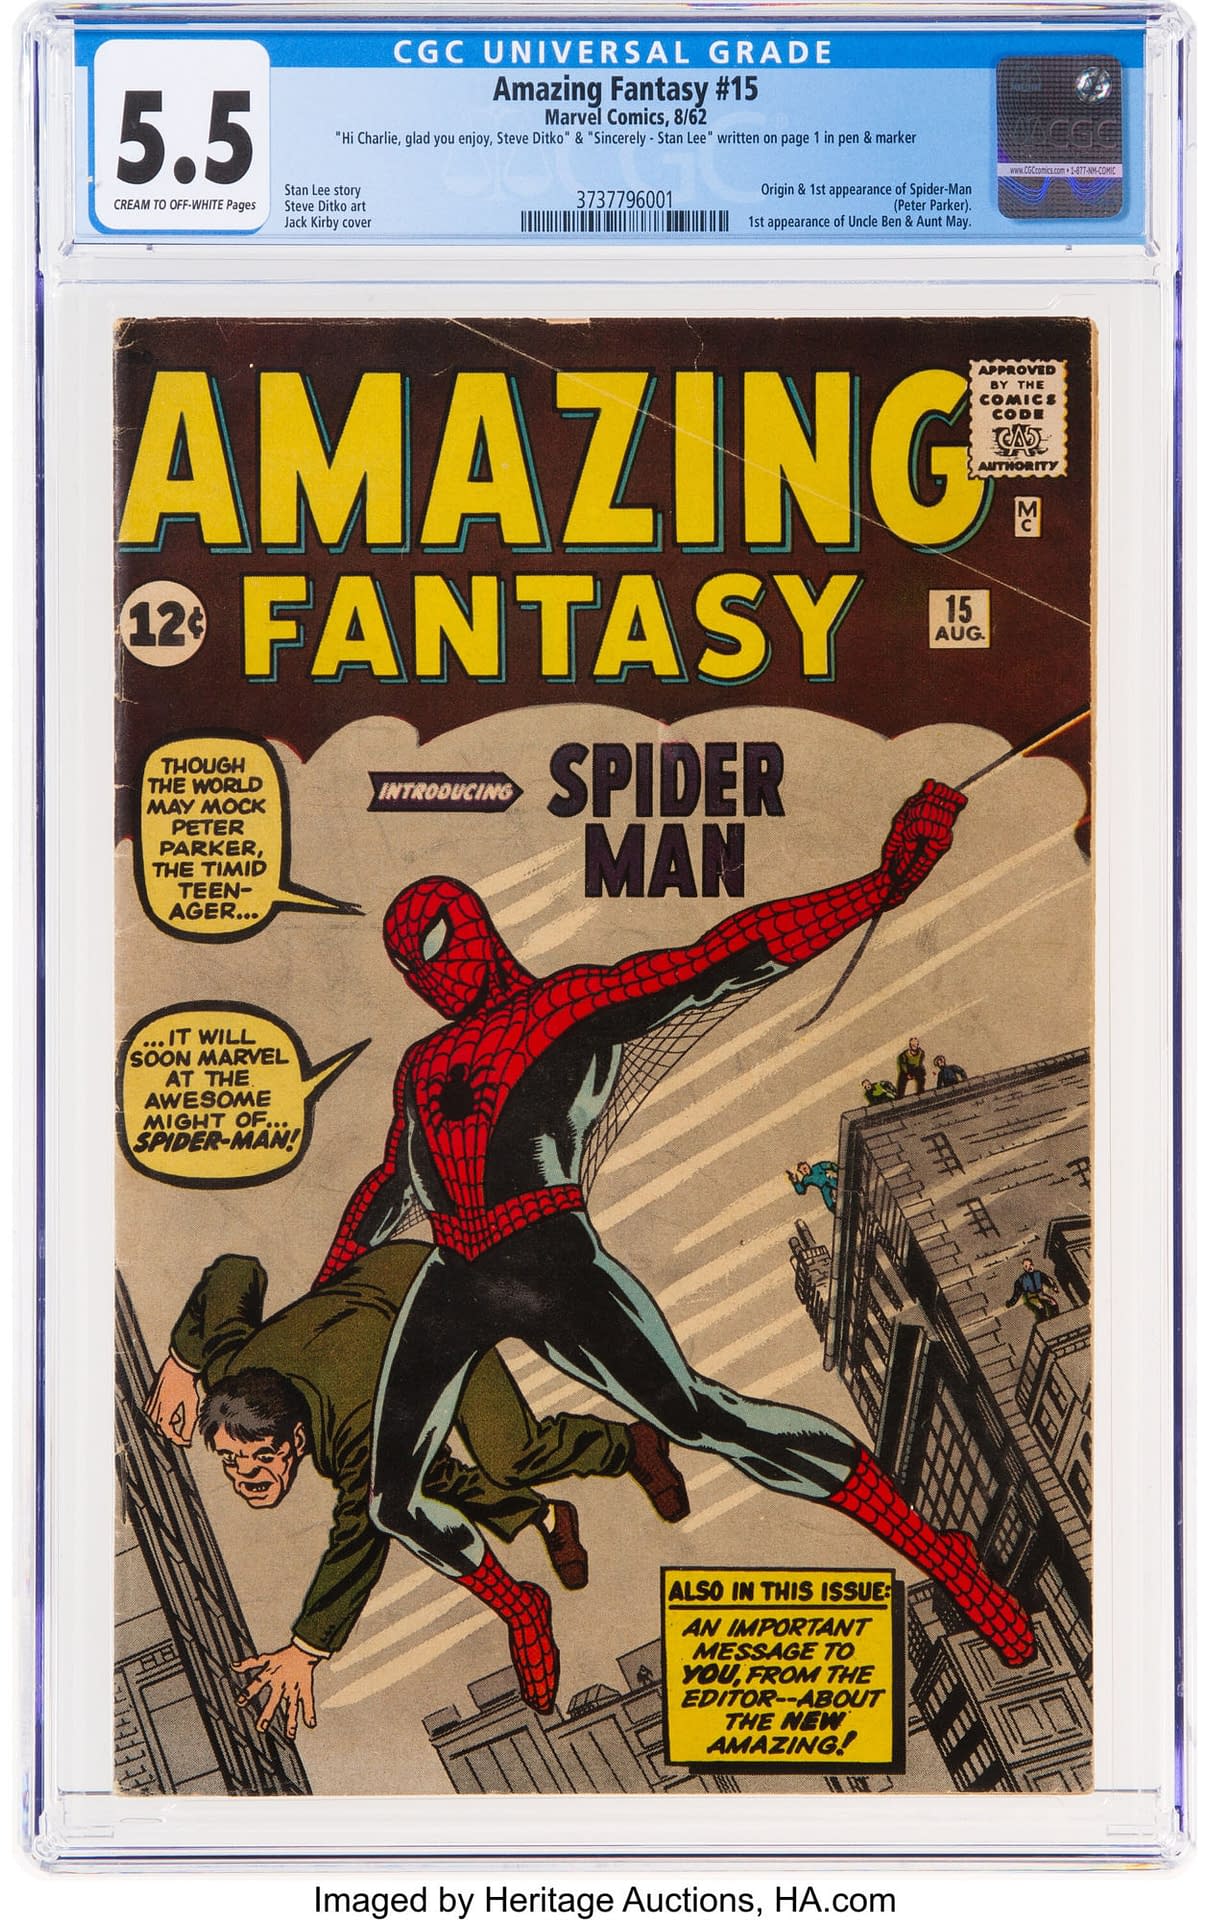 Amazing Fantasy #15 Signed By Stan Lee and Steve Ditko At Auction